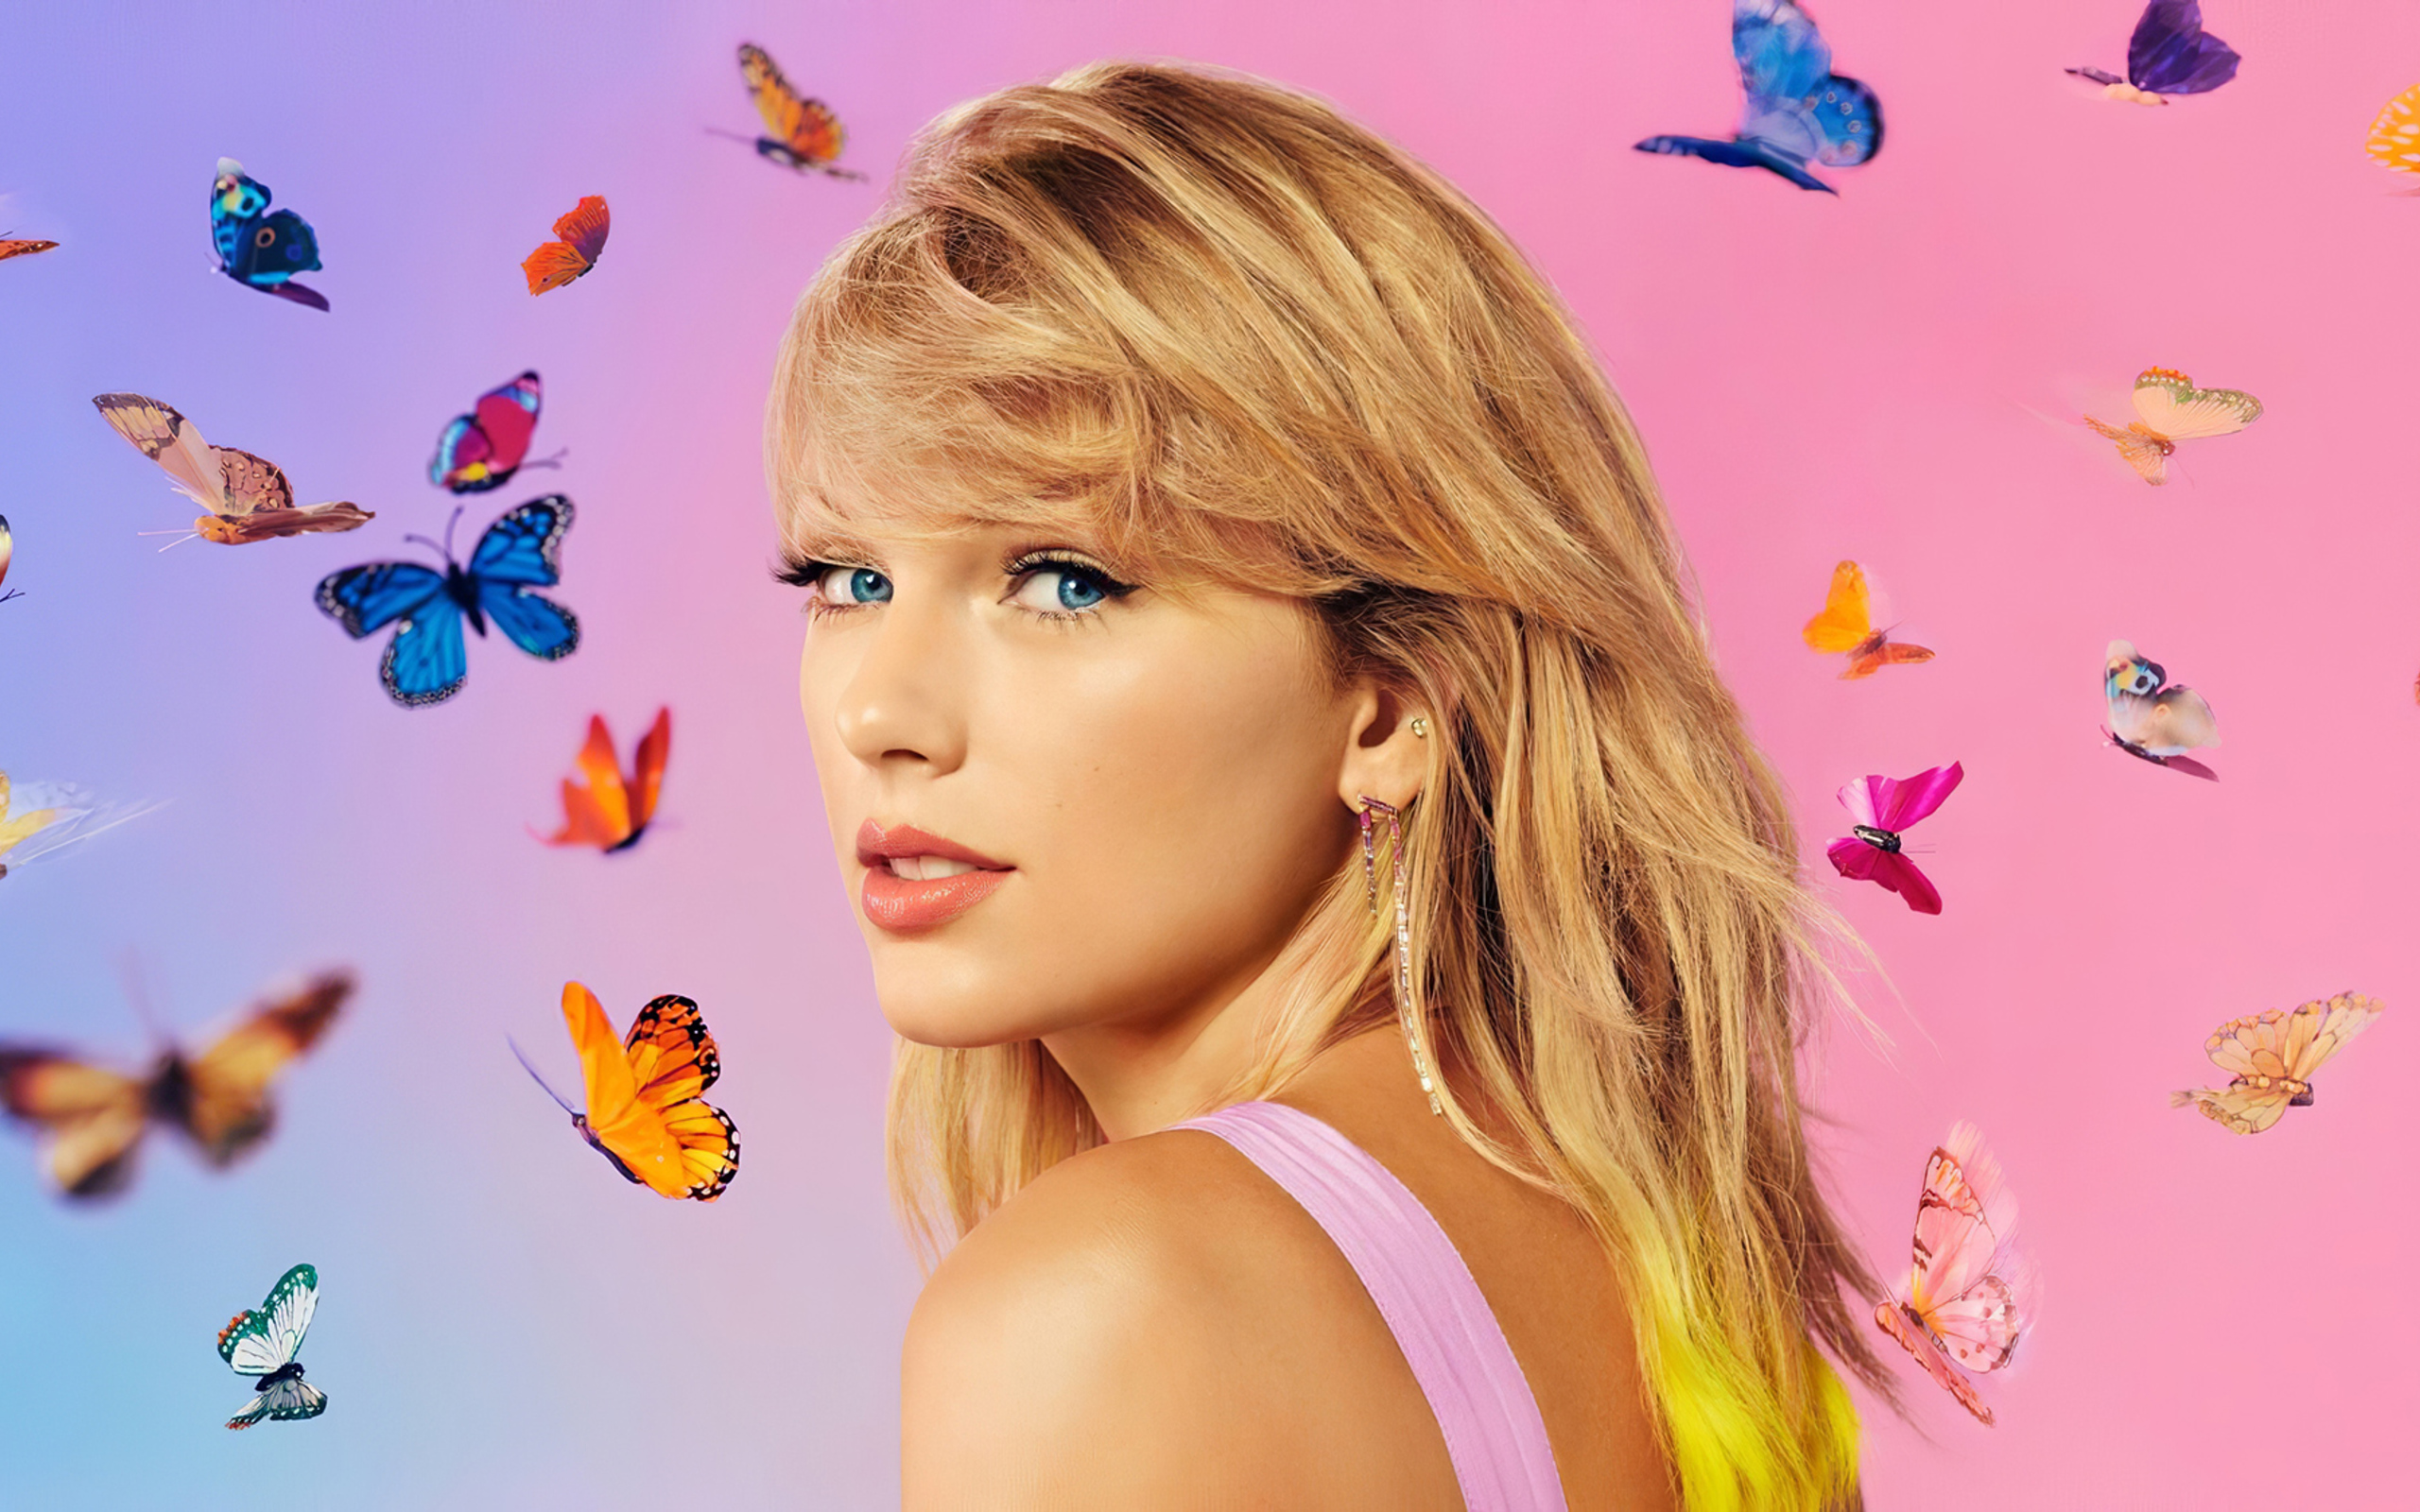 Taylor Swift Apple Music Photoshoot In 2560x1600 Resolution. taylor-swift-a...